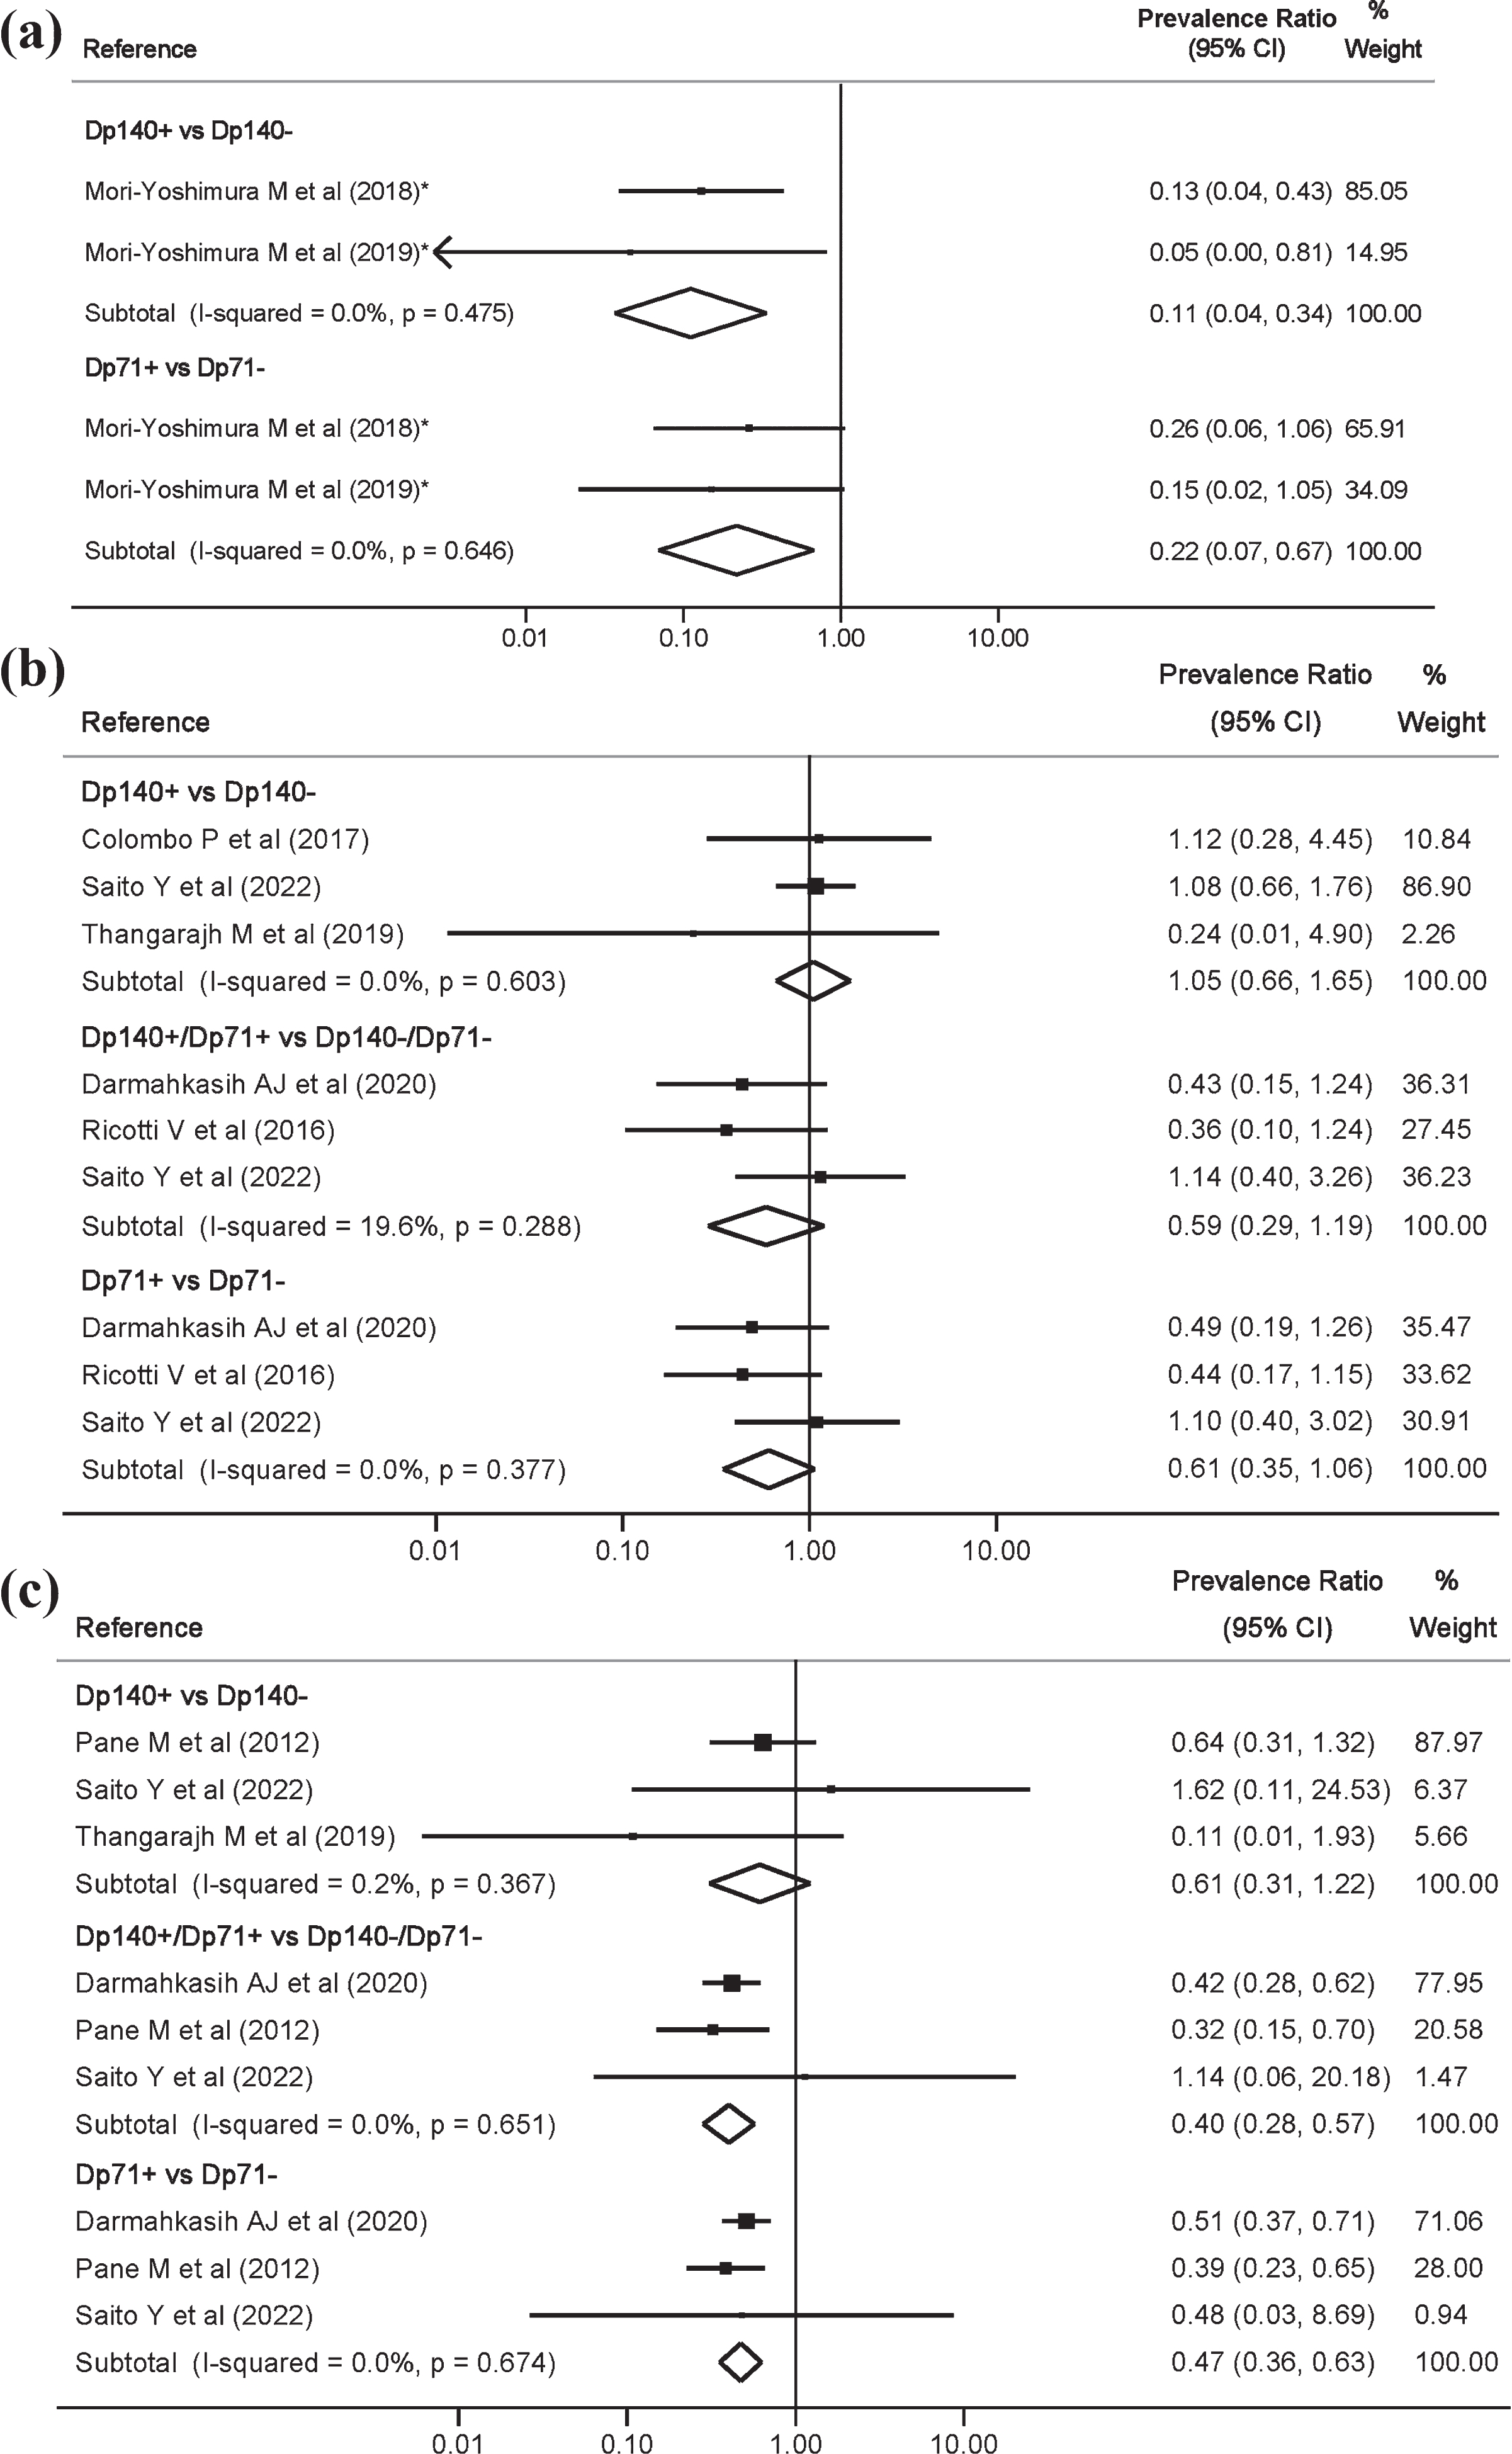 Meta-analysis of the prevalence ratio and 95% confidence interval by genotype comparisons of developmental disorders in Becker muscular dystrophy (a), autism spectrum disorders in Duchenne muscular dystrophy (b), and attention deficit hyperactivity disorder in Duchenne muscular dystrophy (c).